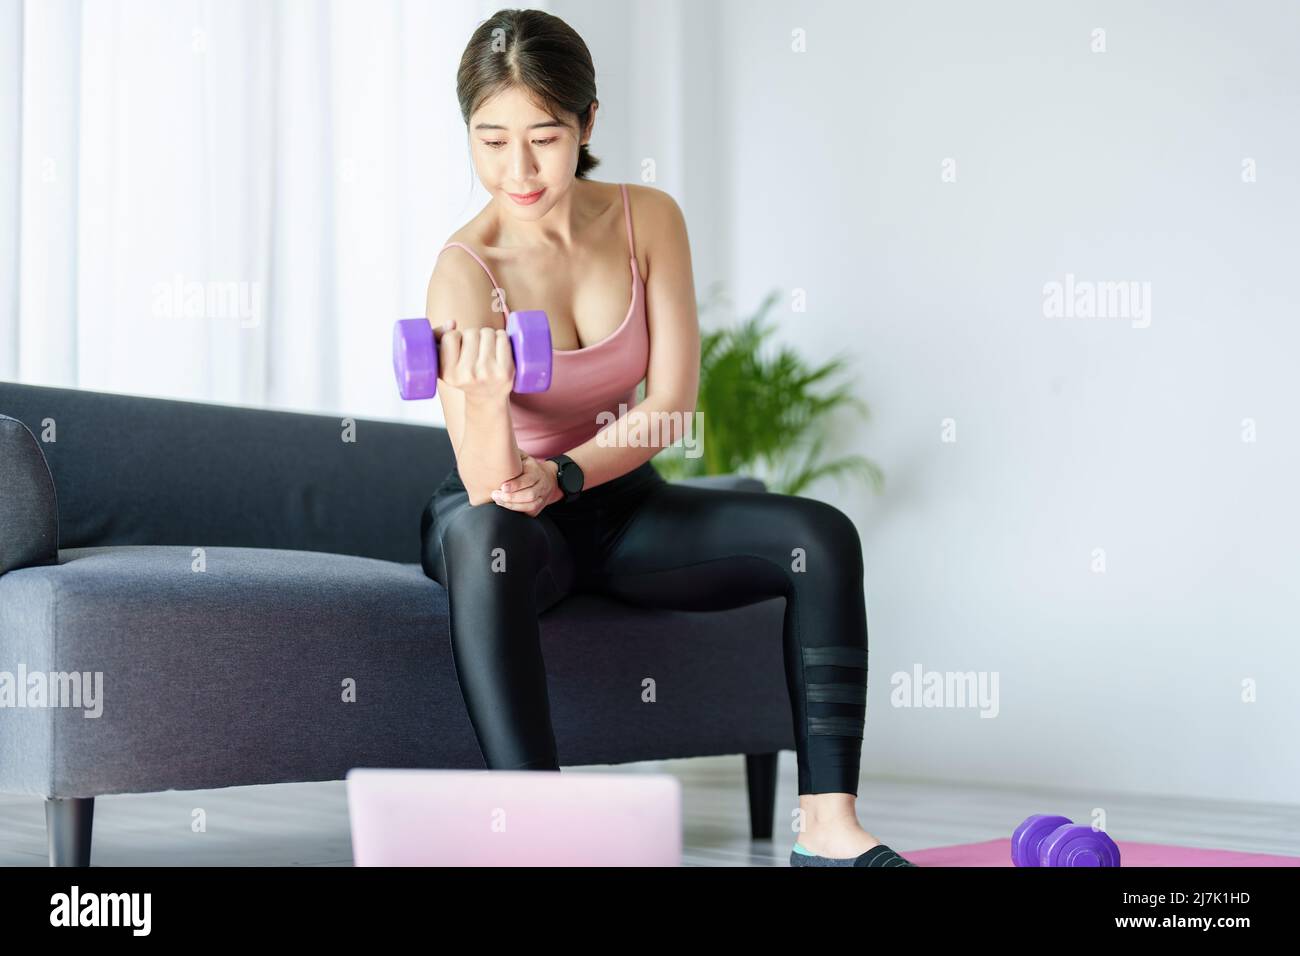 stress relief, , breathing exercises, meditation, portrait of Asian healthy woman lifting weights to strengthen her muscles after work. Stock Photo